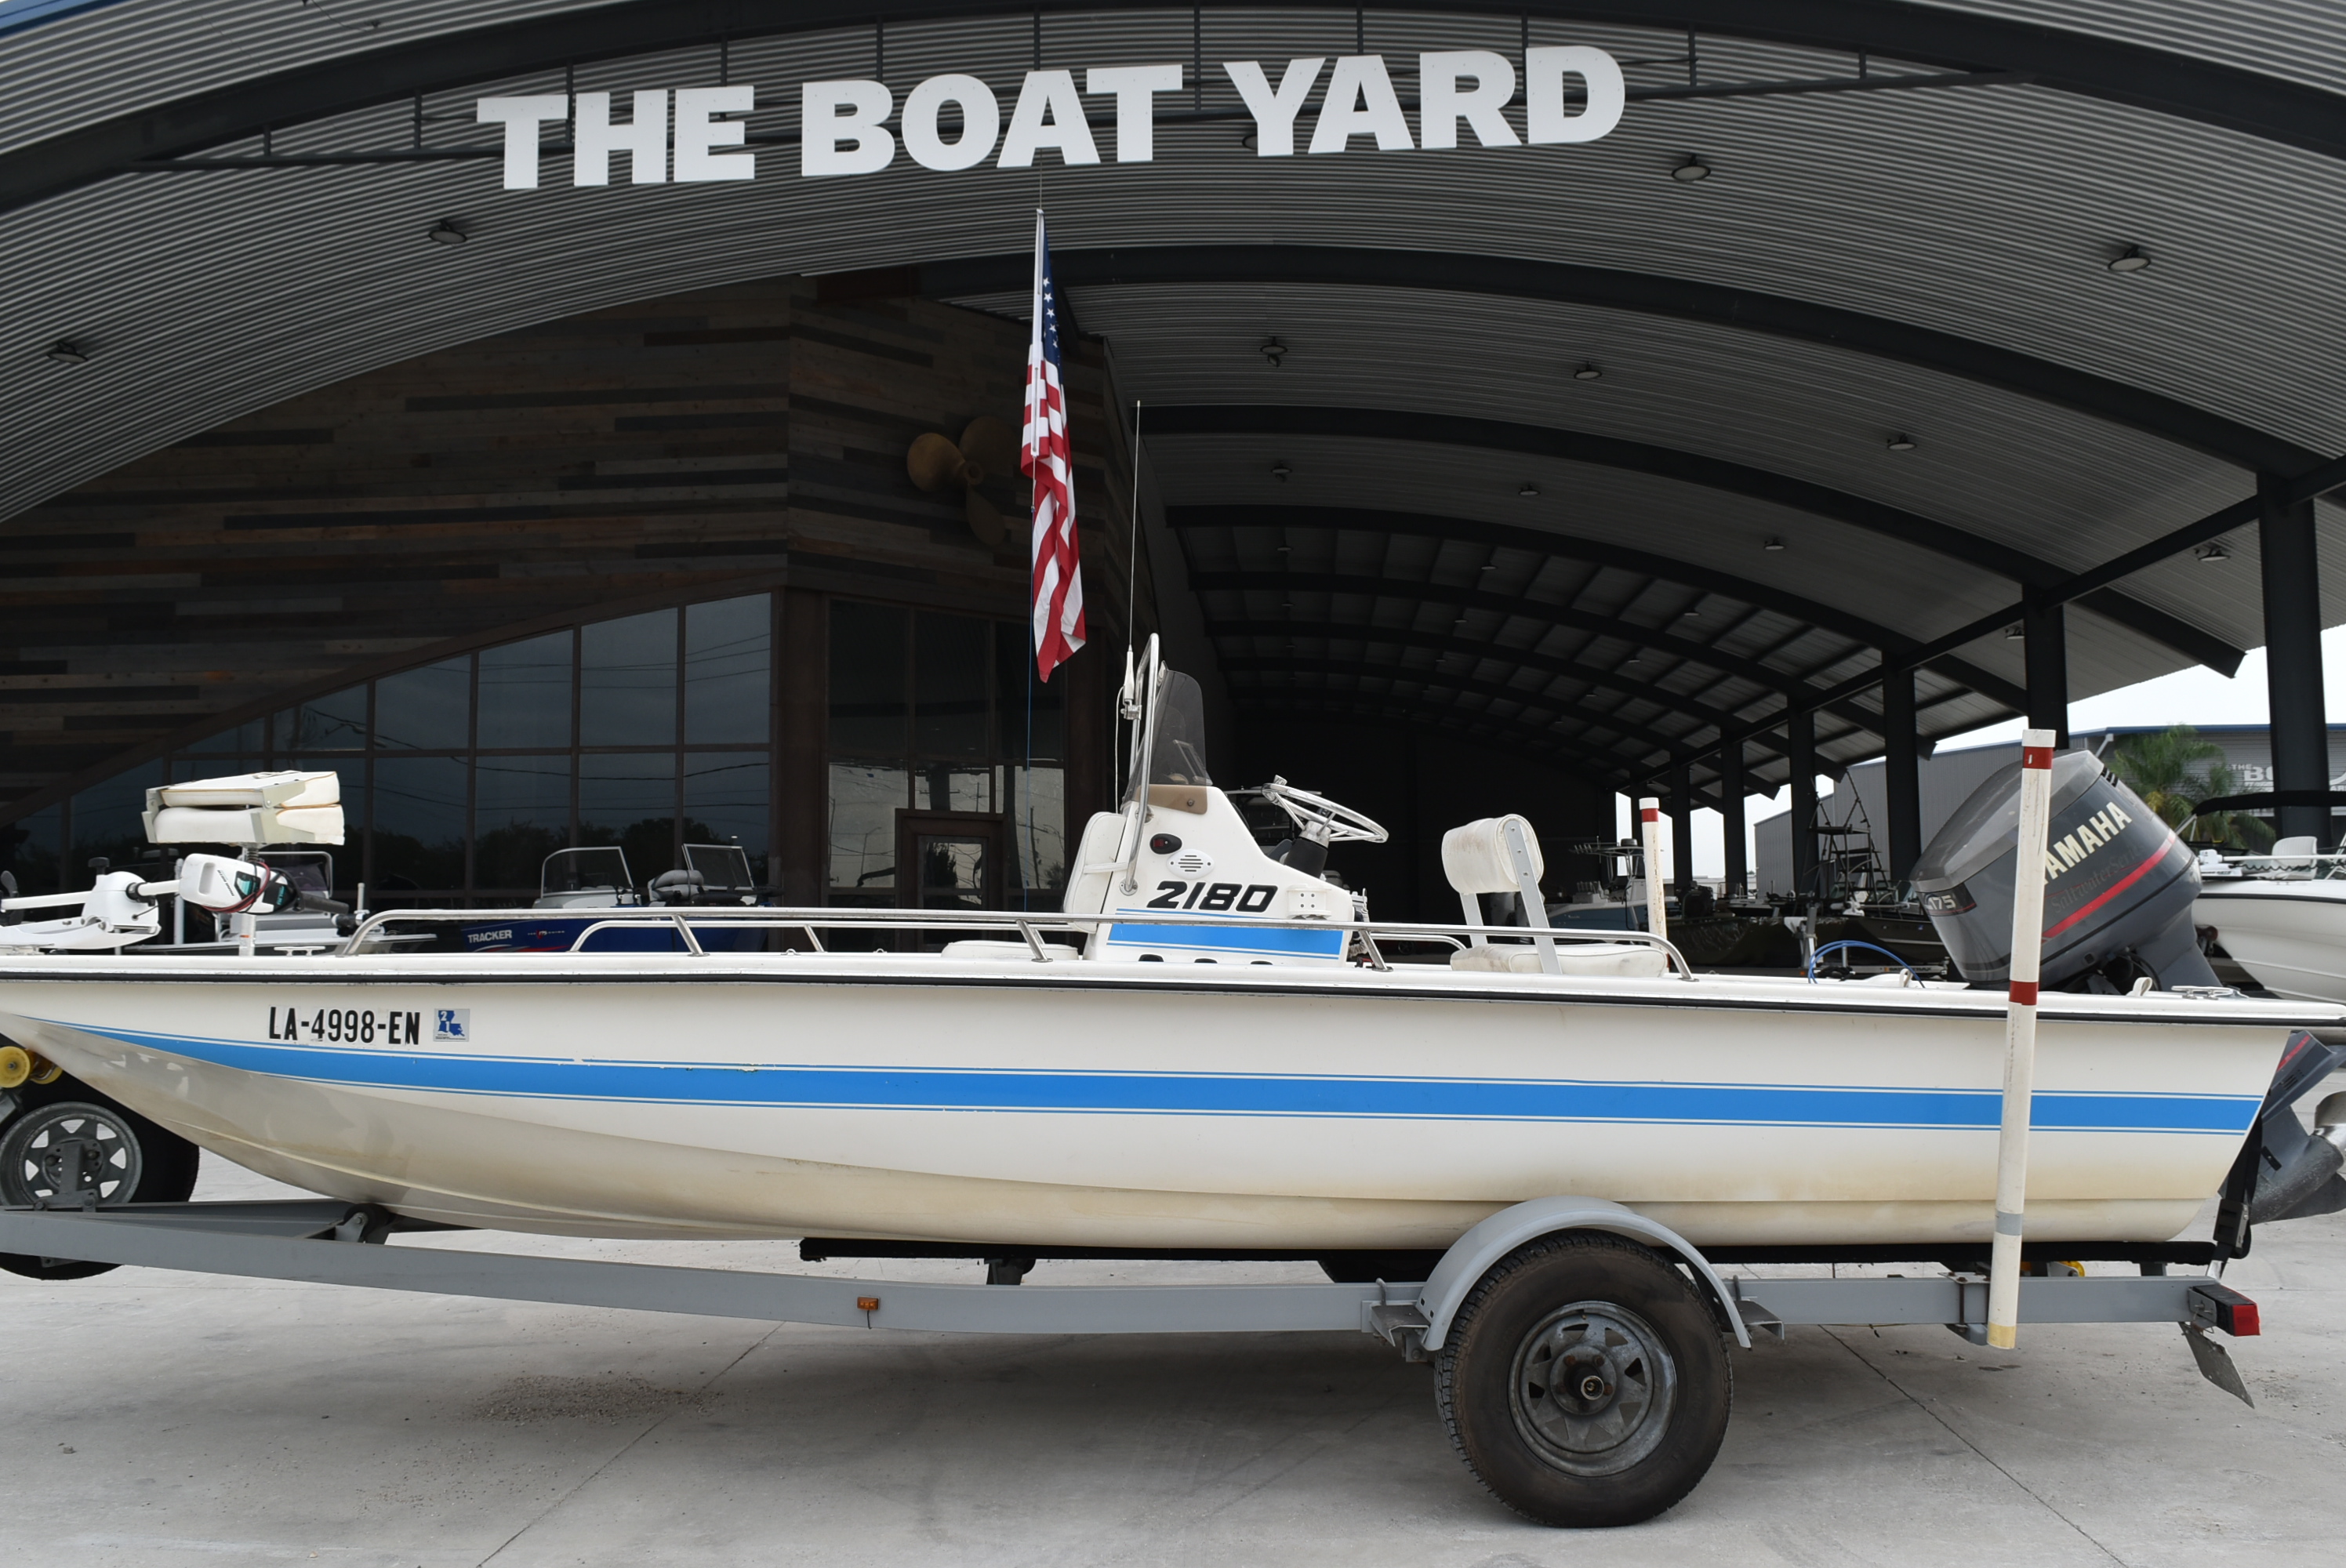 1995 Century boat for sale, model of the boat is 2180 & Image # 1 of 8